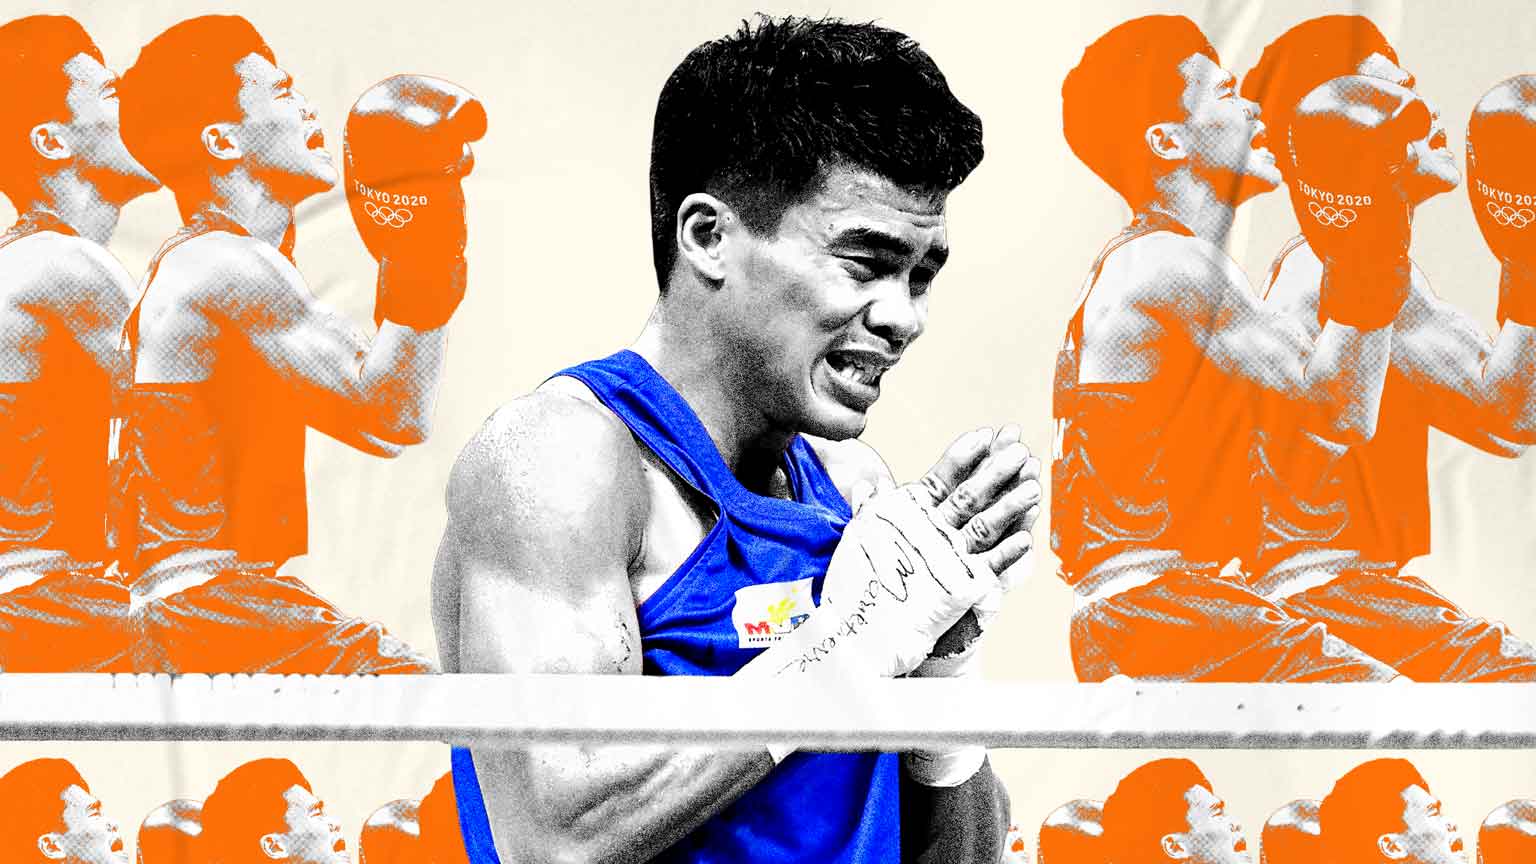 CARLO PAALAM AIMS FOR THE GOLD AS FILIPINO BOXERS CONTINUE TO MAKE HISTORY AT THE 2020 TOKYO OLYMPICS